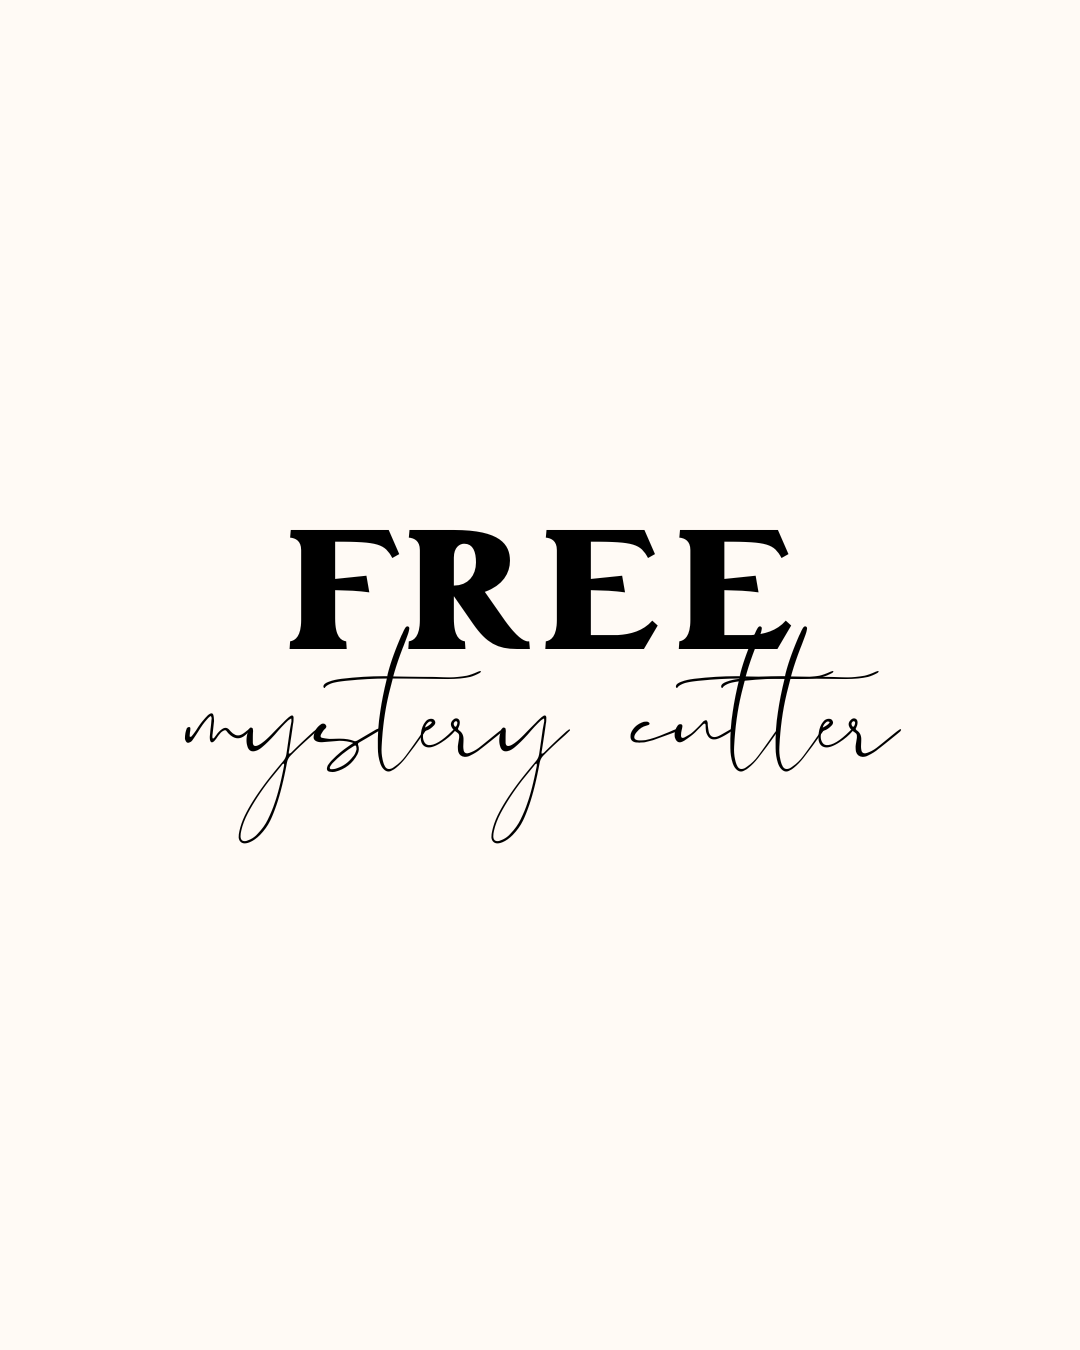 FREE Mystery Clay Cutter